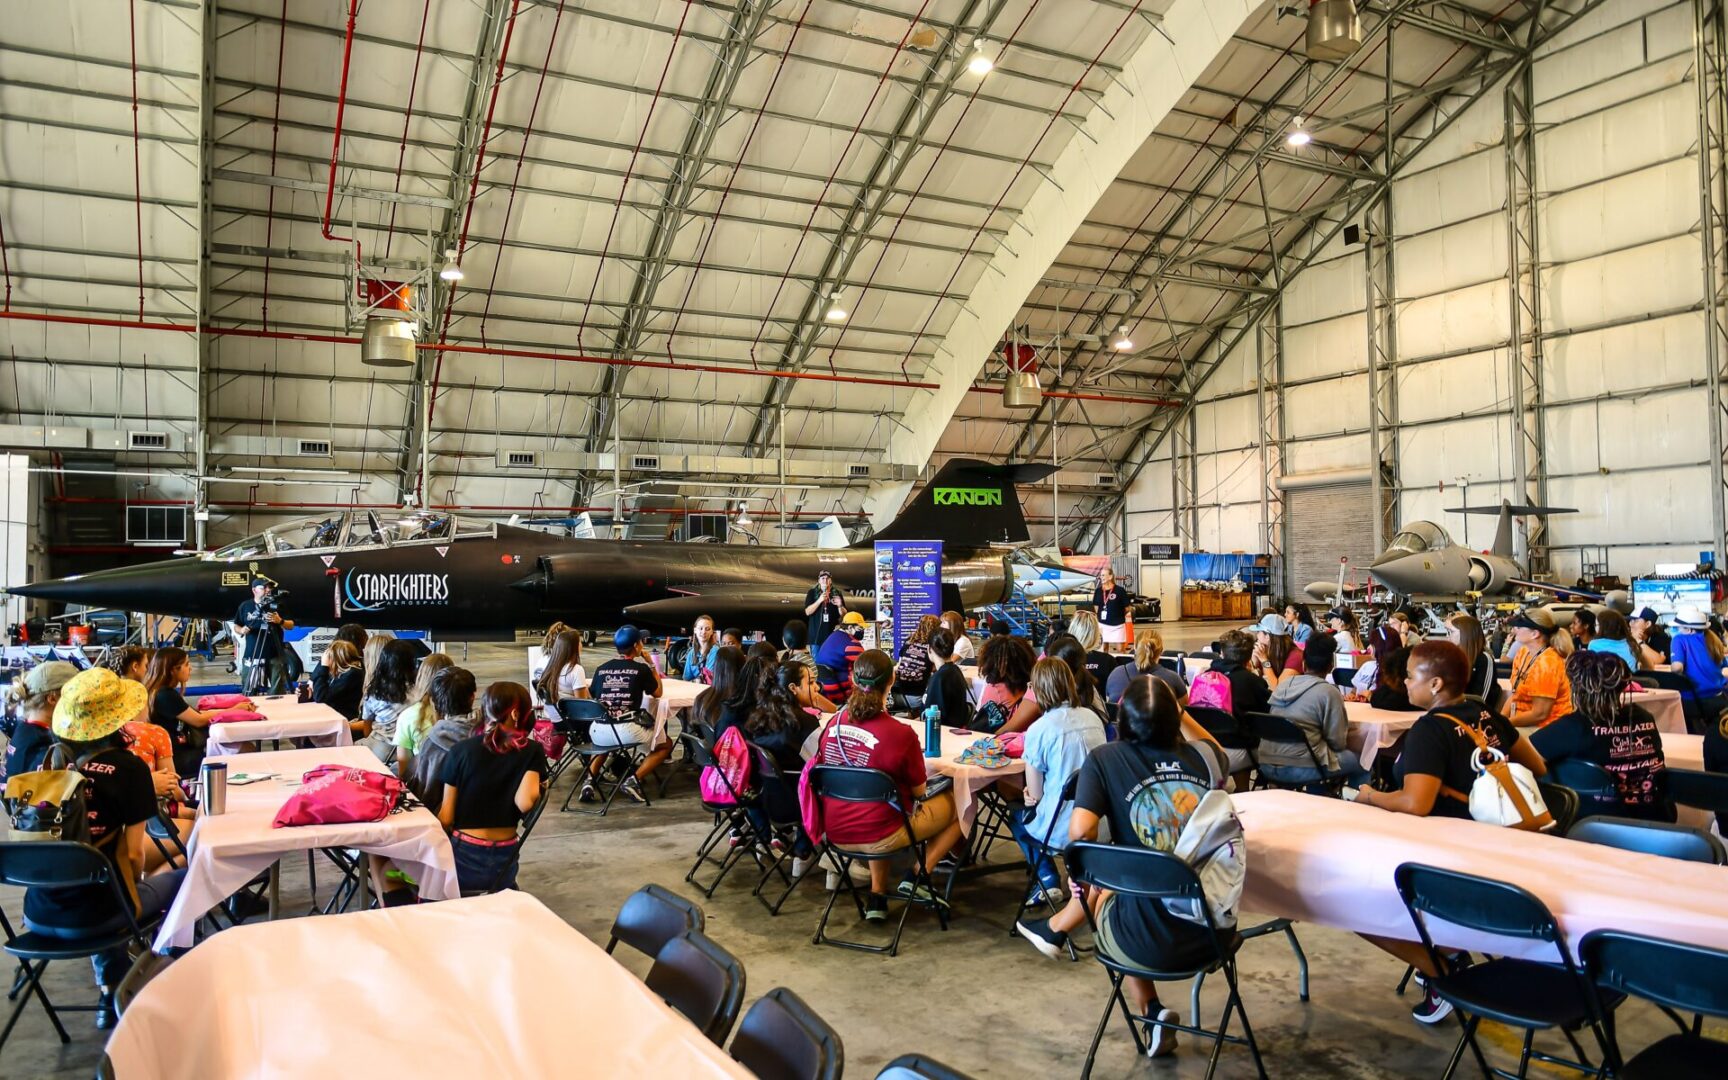 A group of people sitting around tables in an airplane hangar.